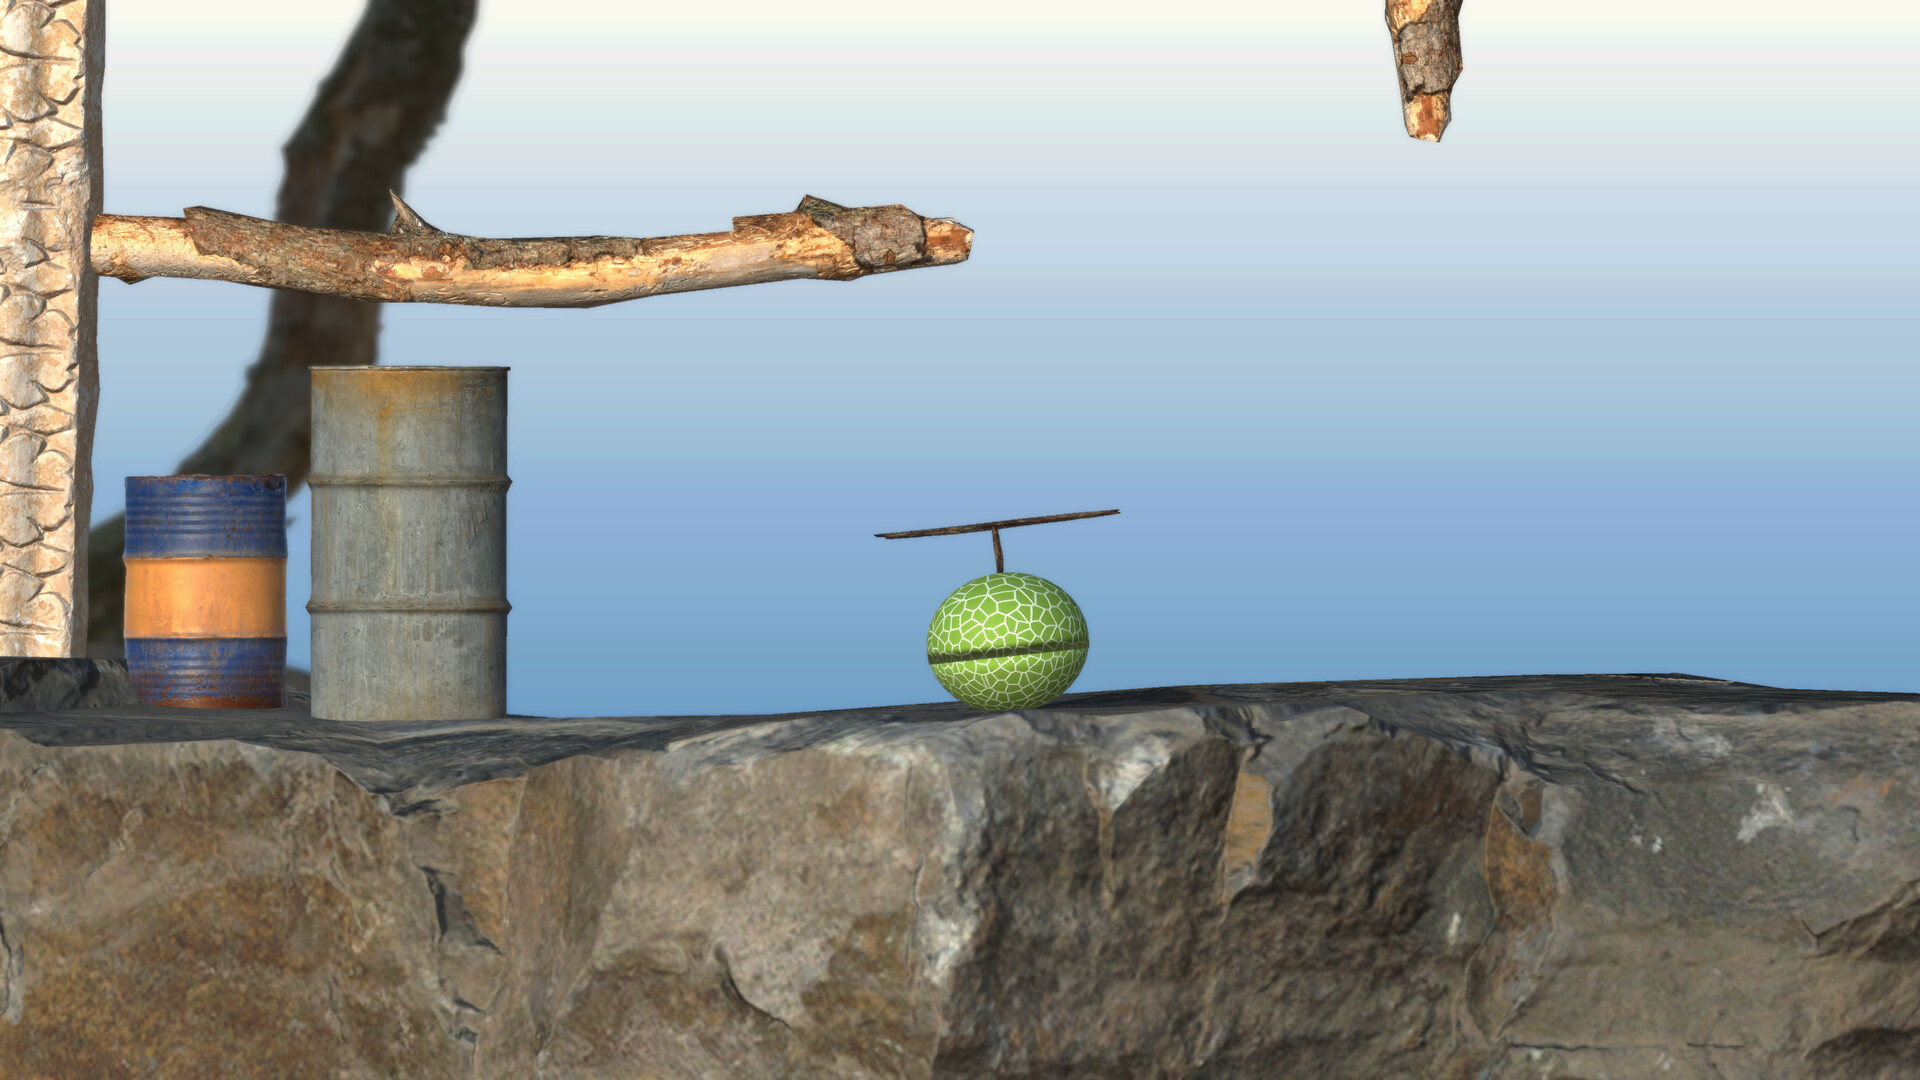 Getting Over It: Play Getting Over It for free